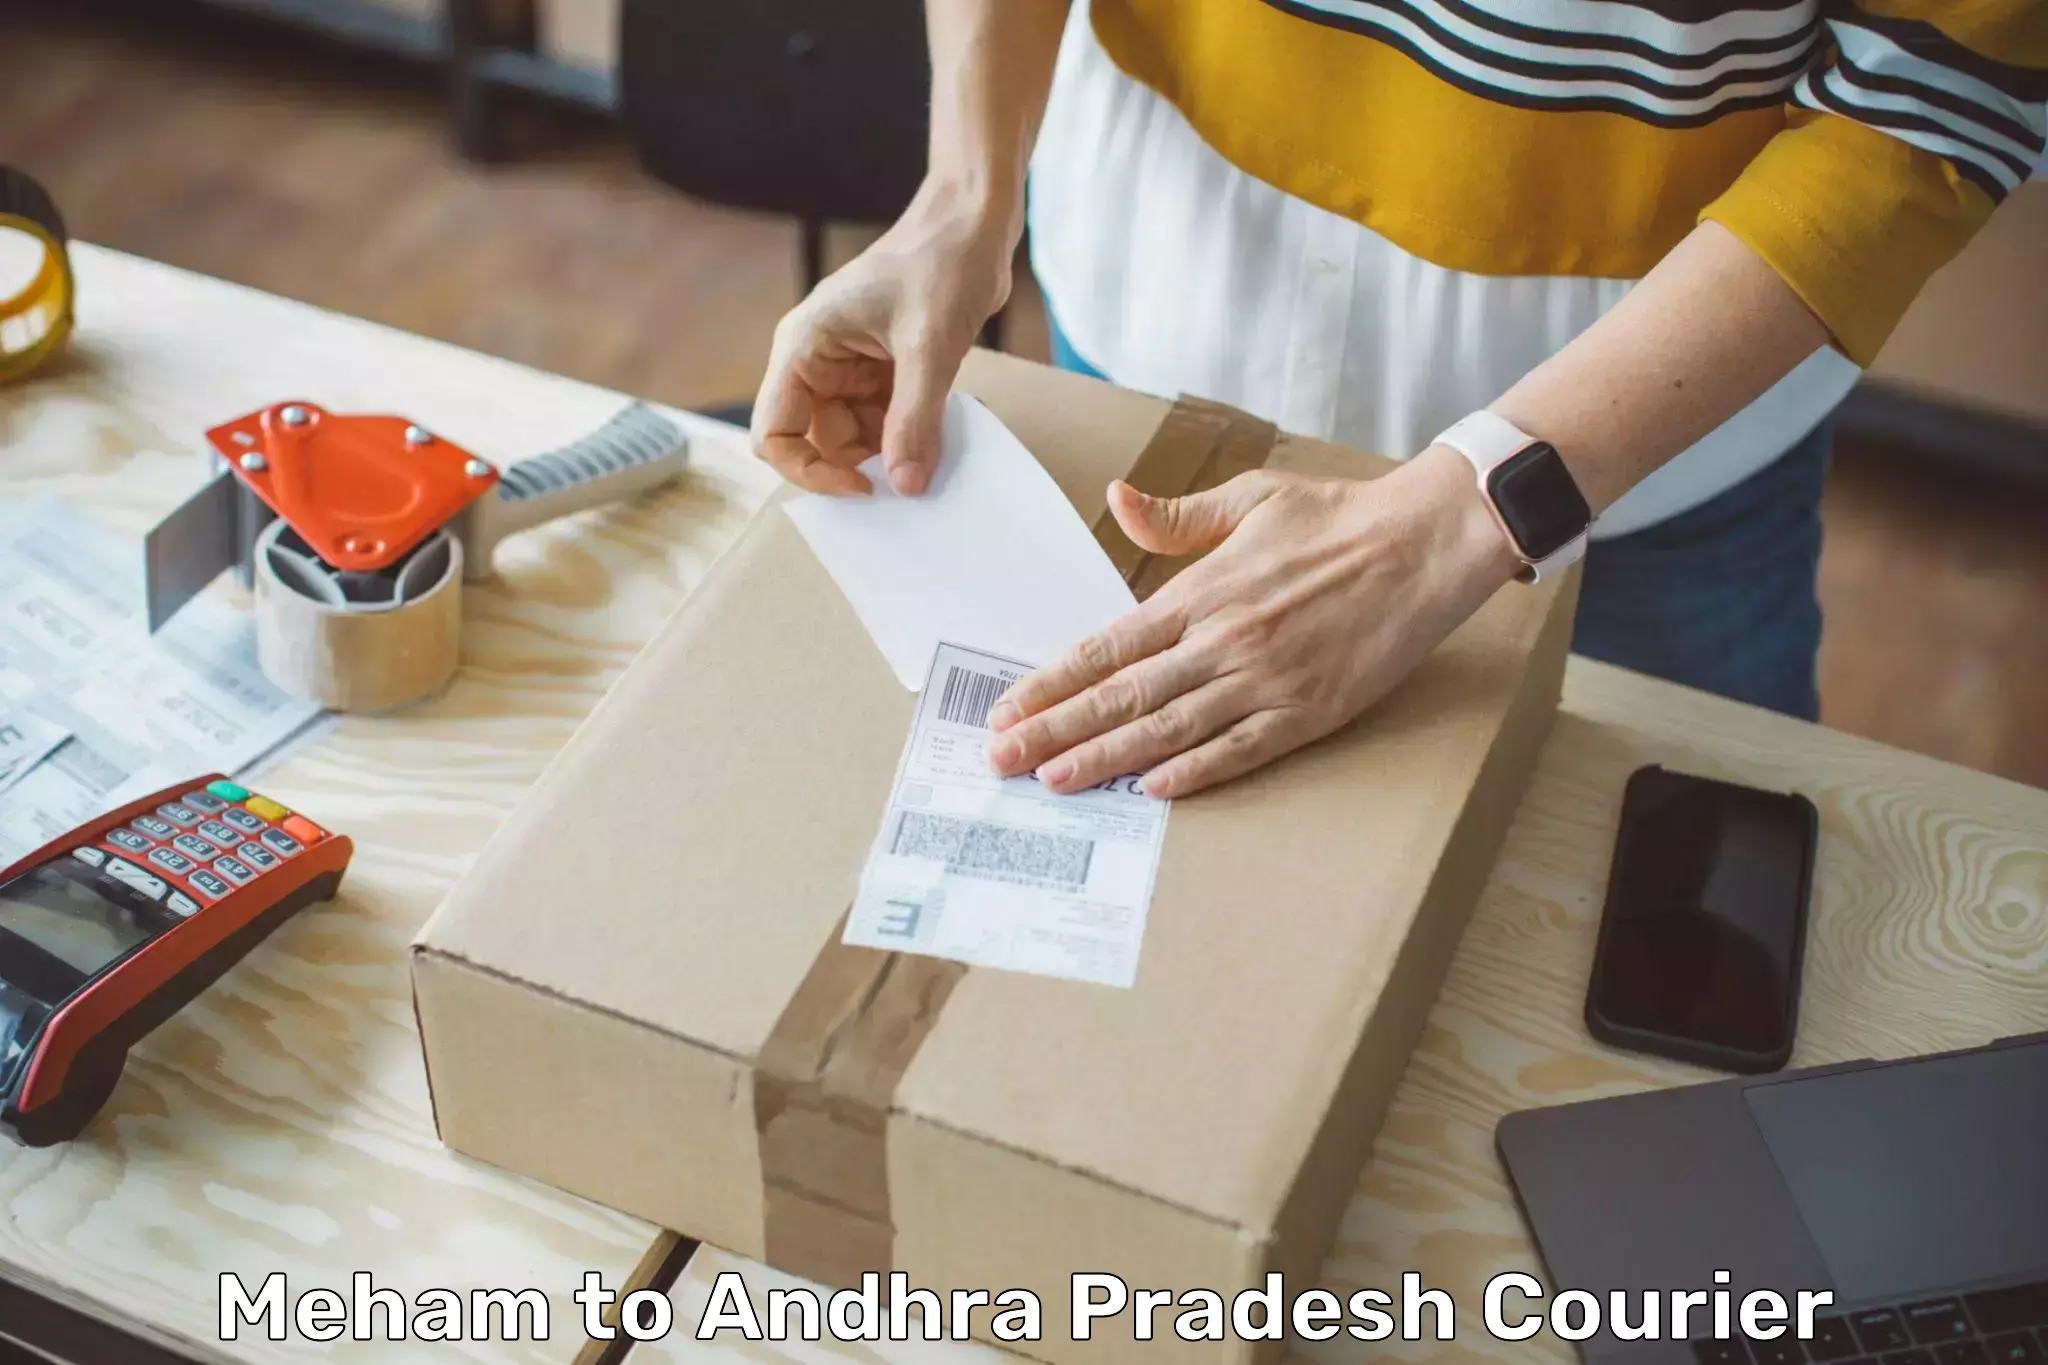 Global courier networks Meham to Andhra Pradesh